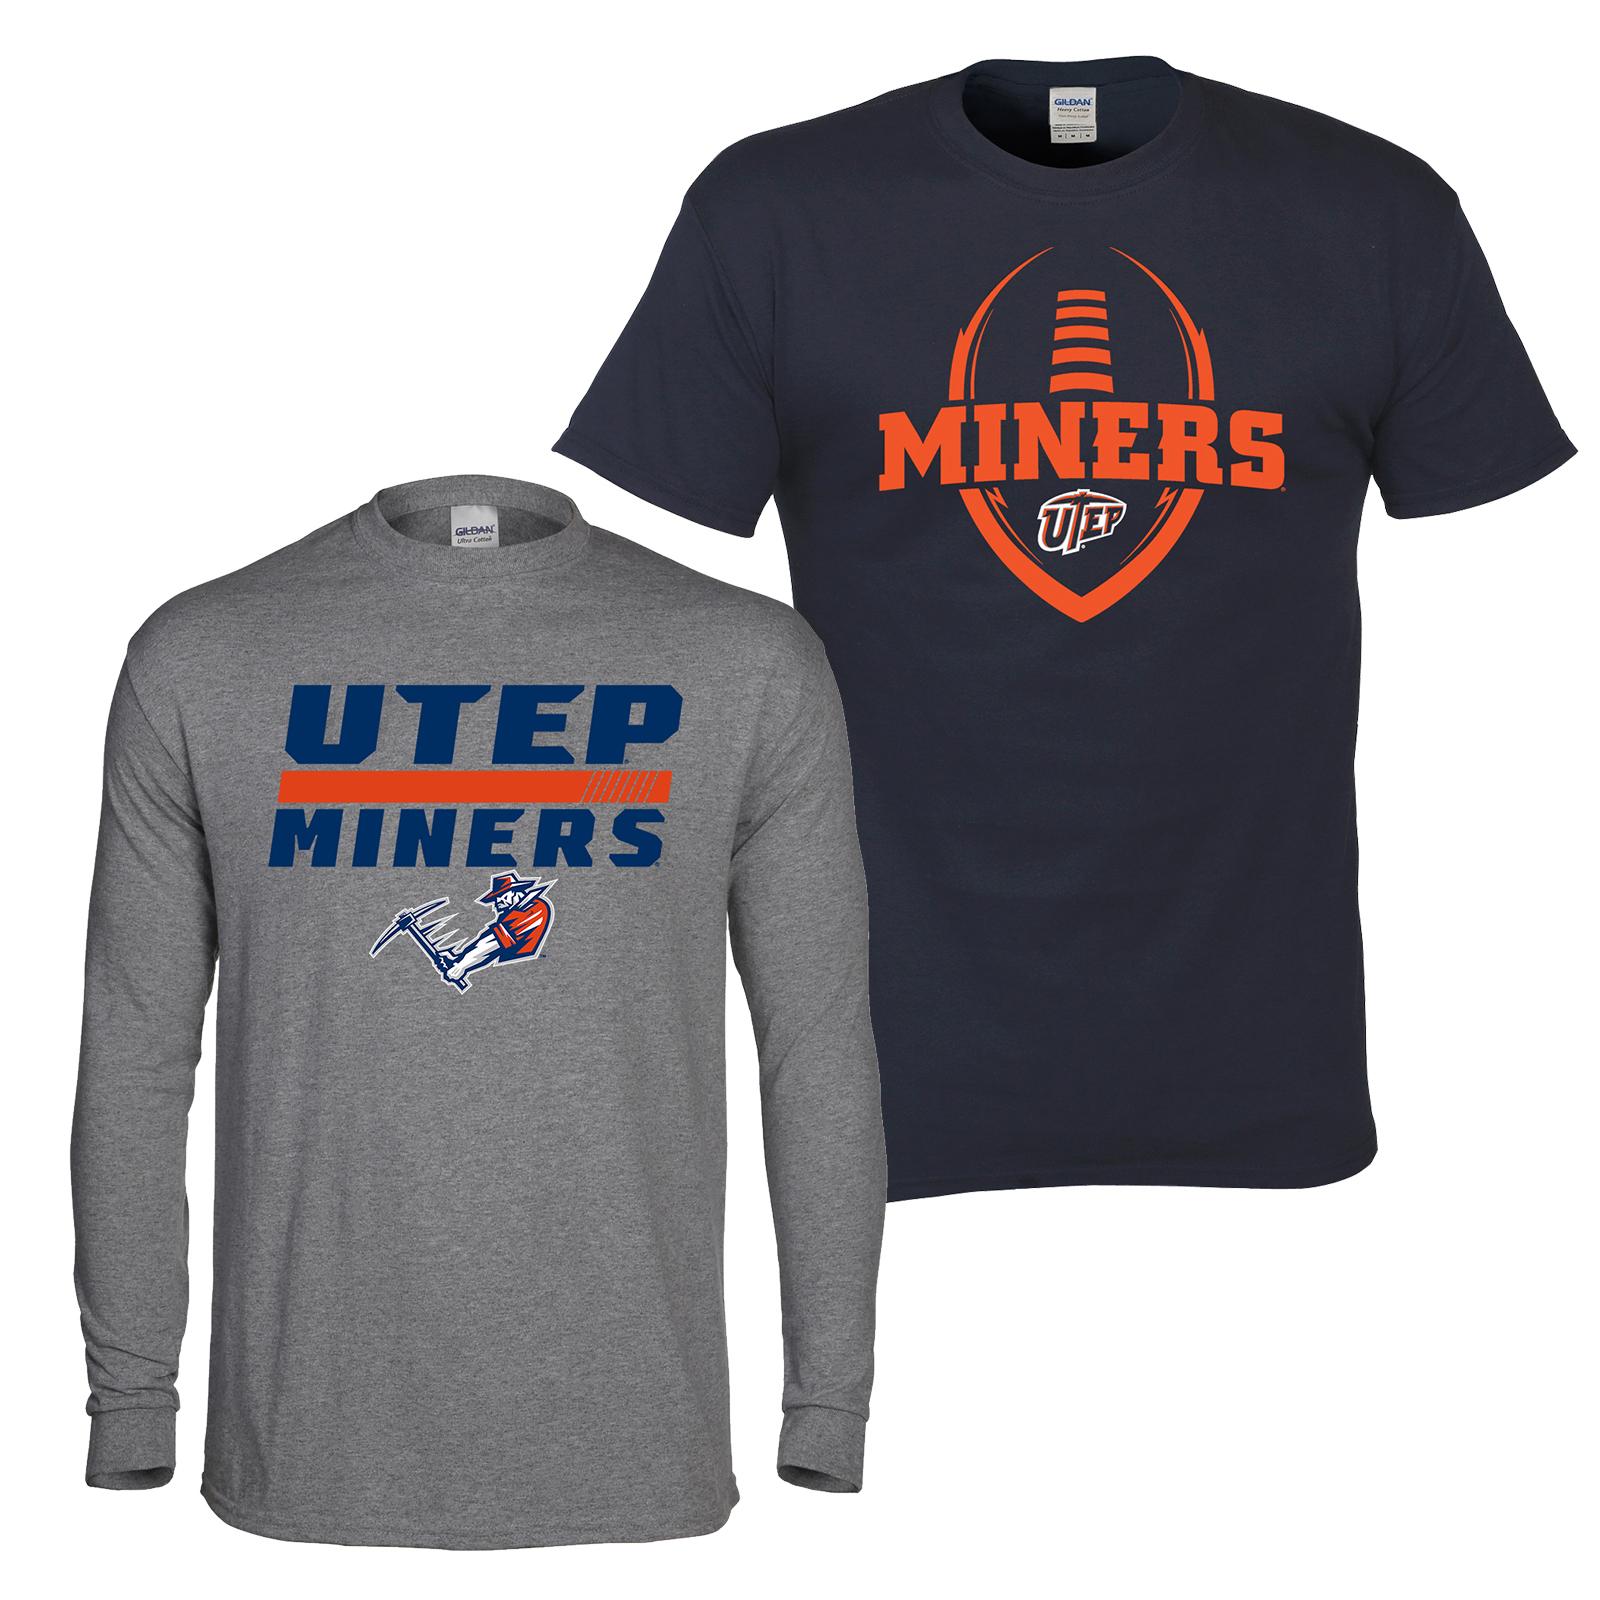 NCAA Boys' 2-Pack Graphic T-Shirts - UTEP Miners